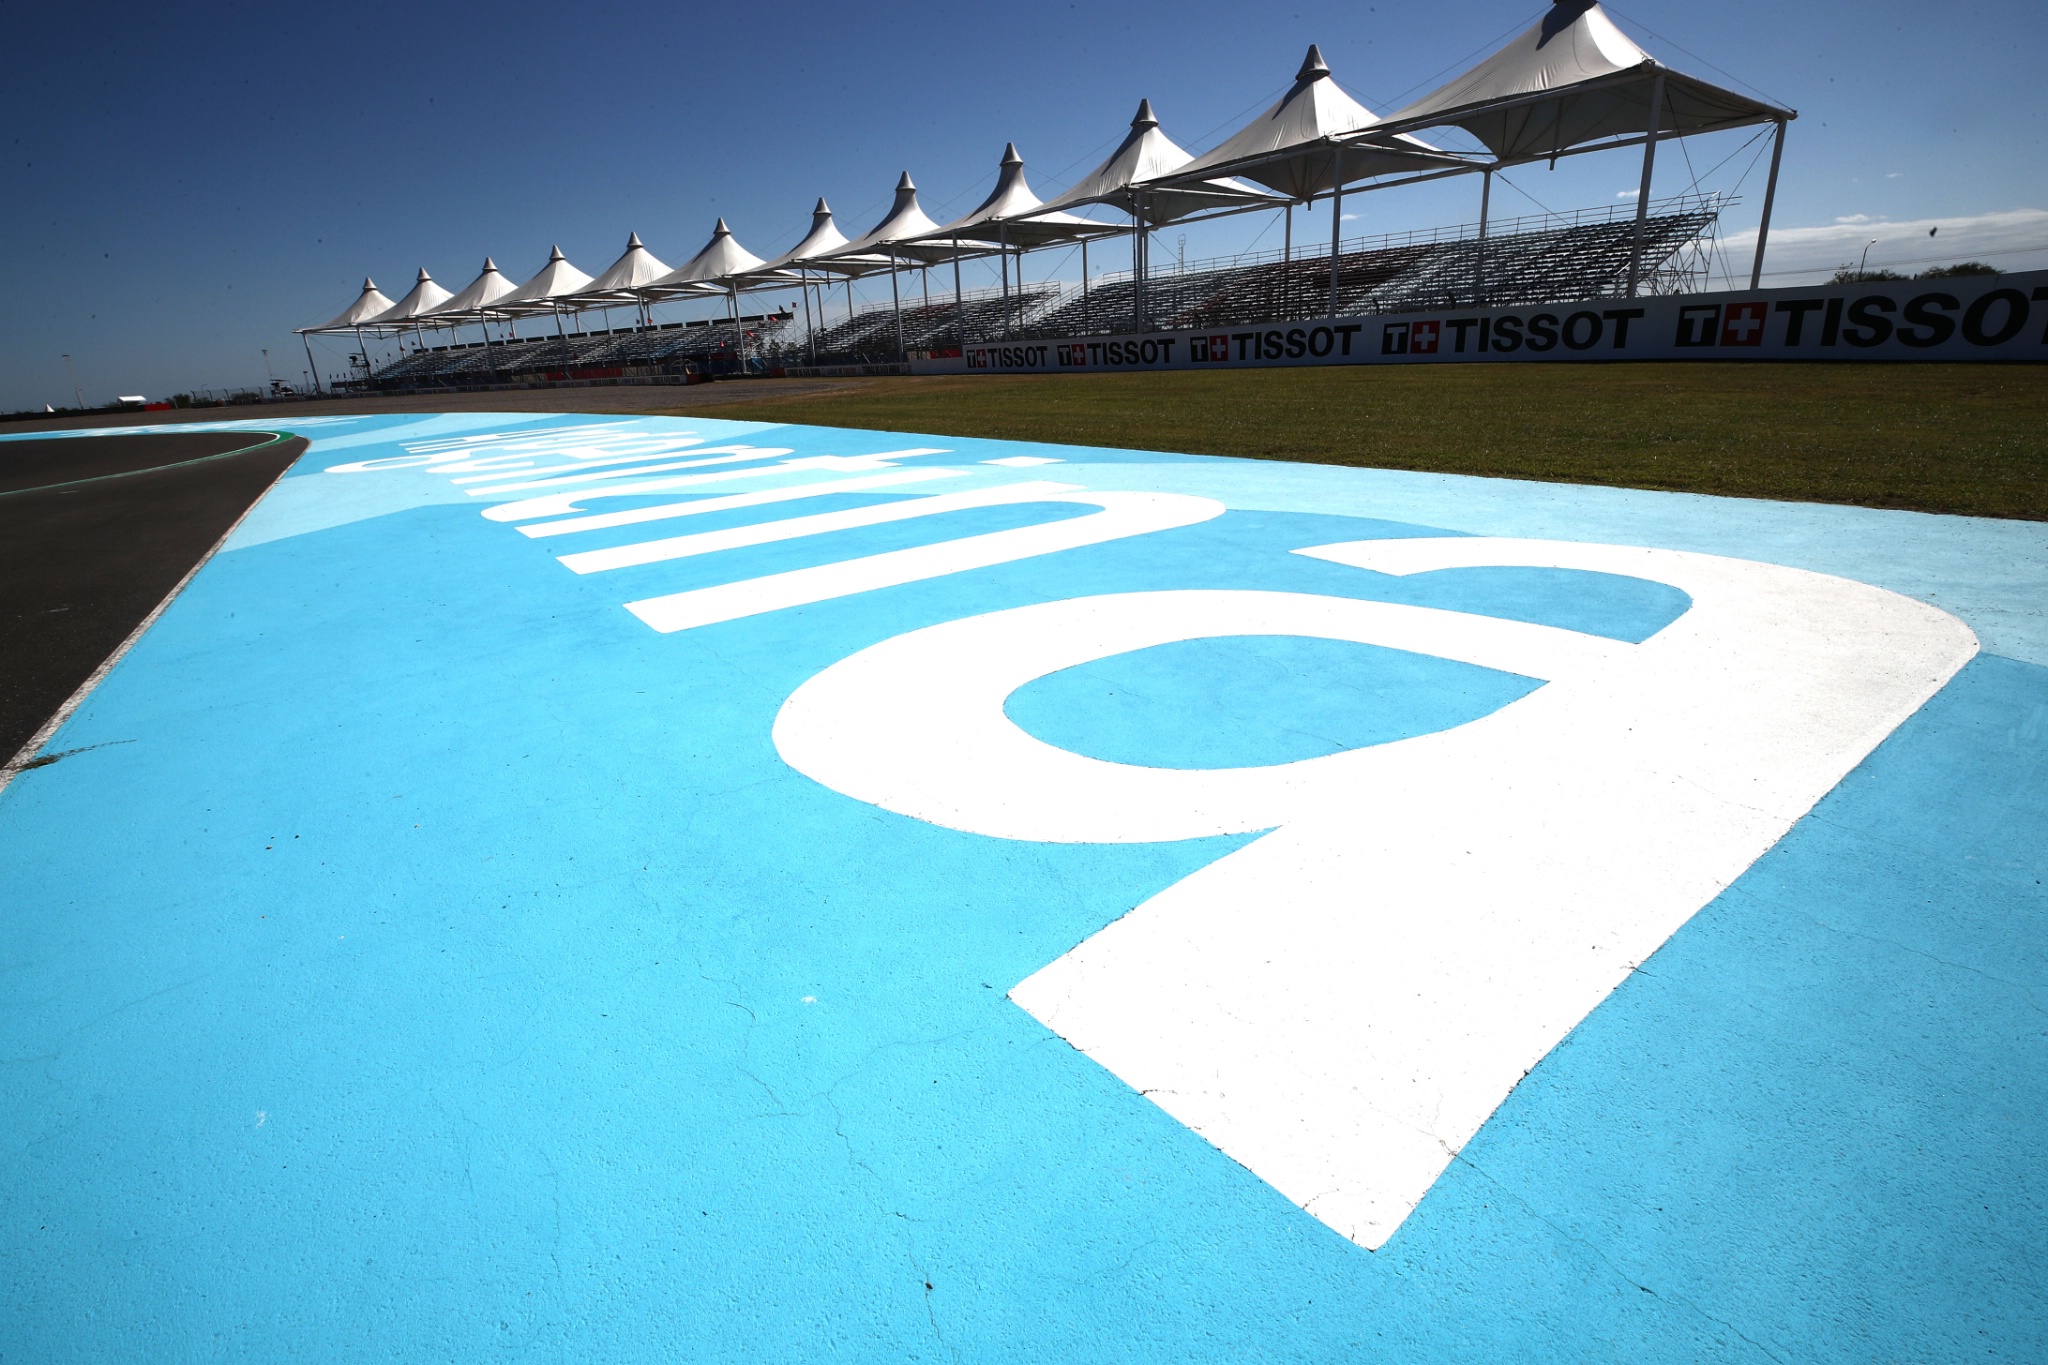 Track, Argentinian MotoGP, 31 March 2022